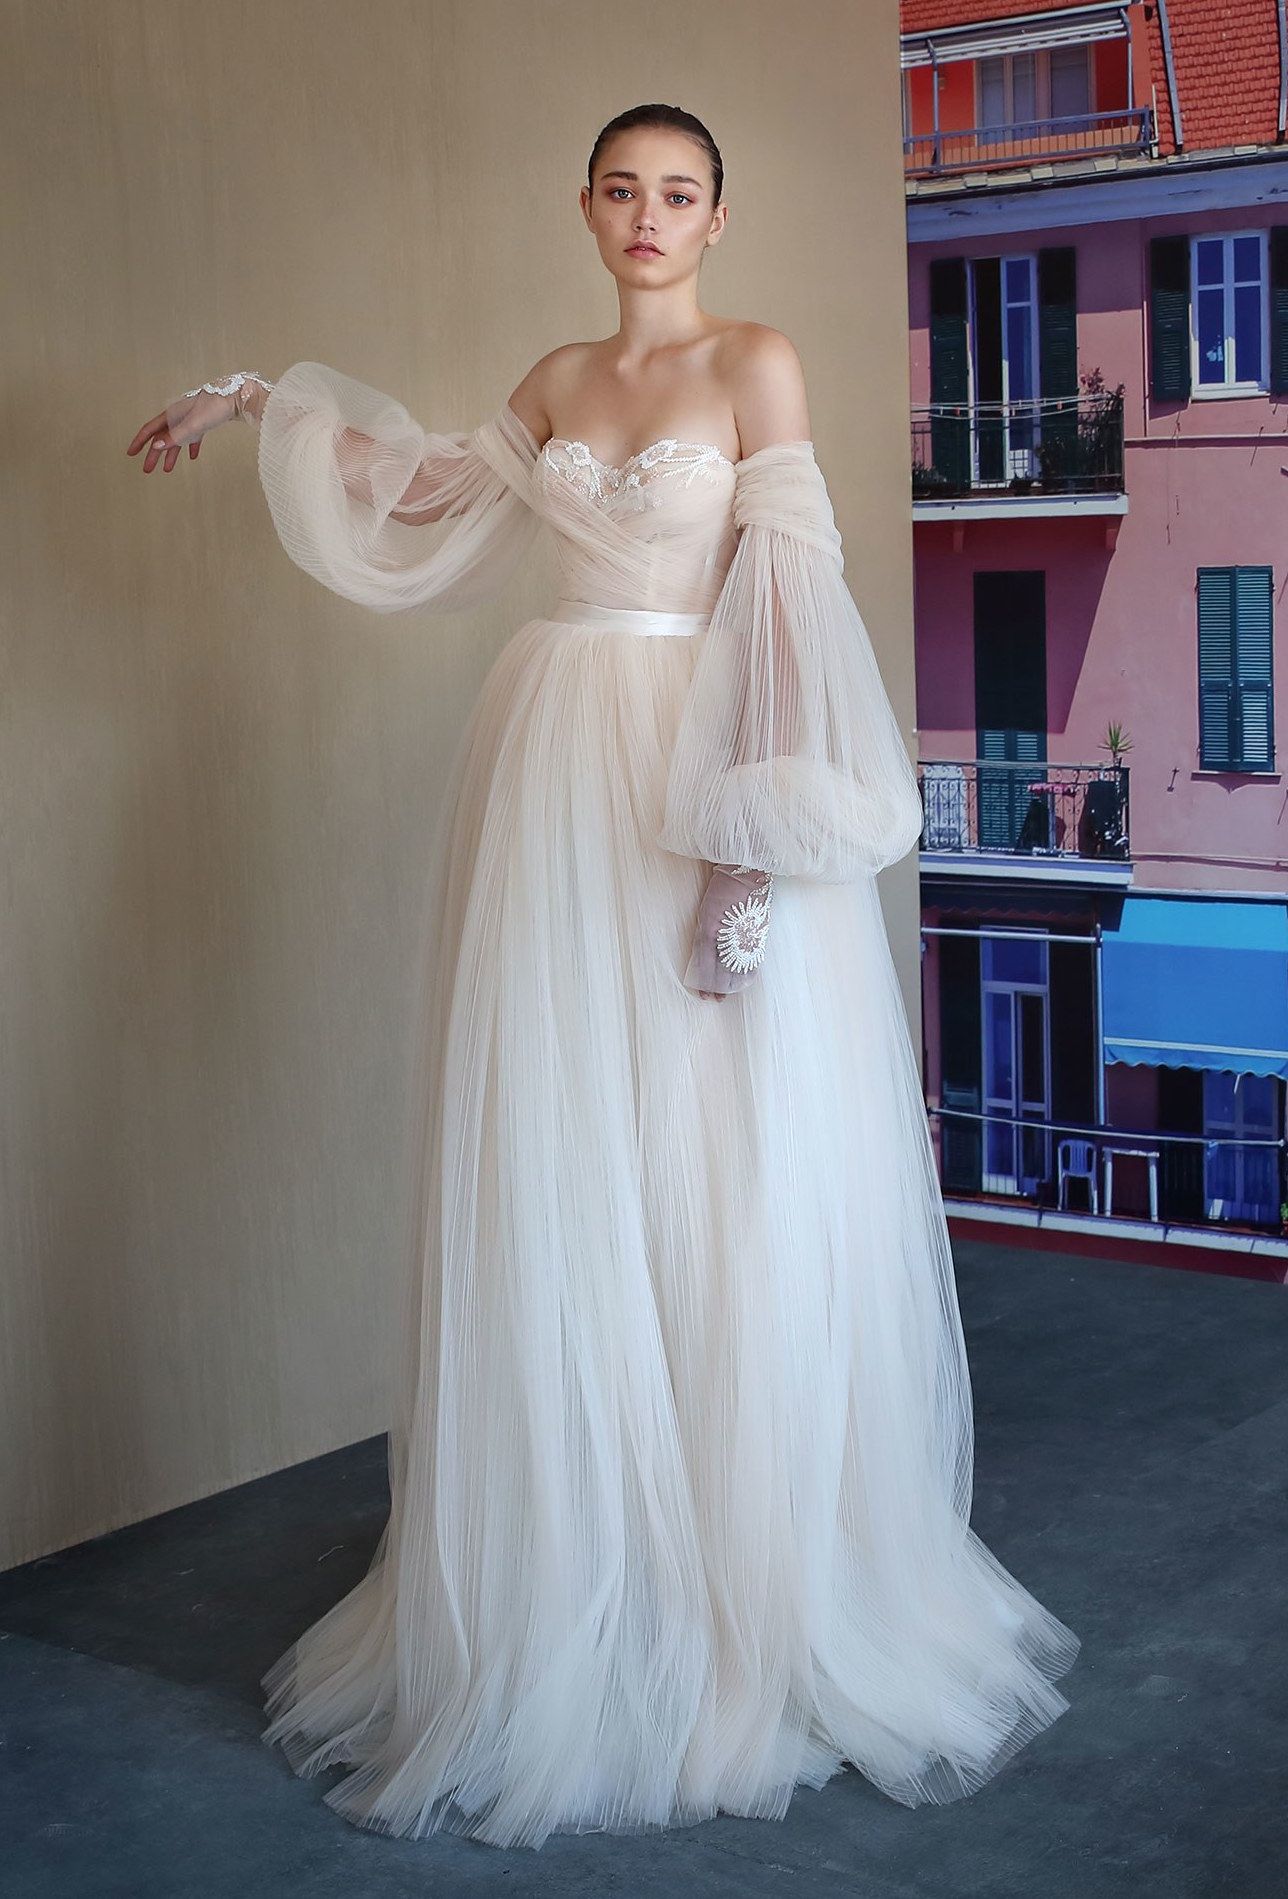 The 7 Biggest Wedding Dress Trends of 2019 | Who What Wear